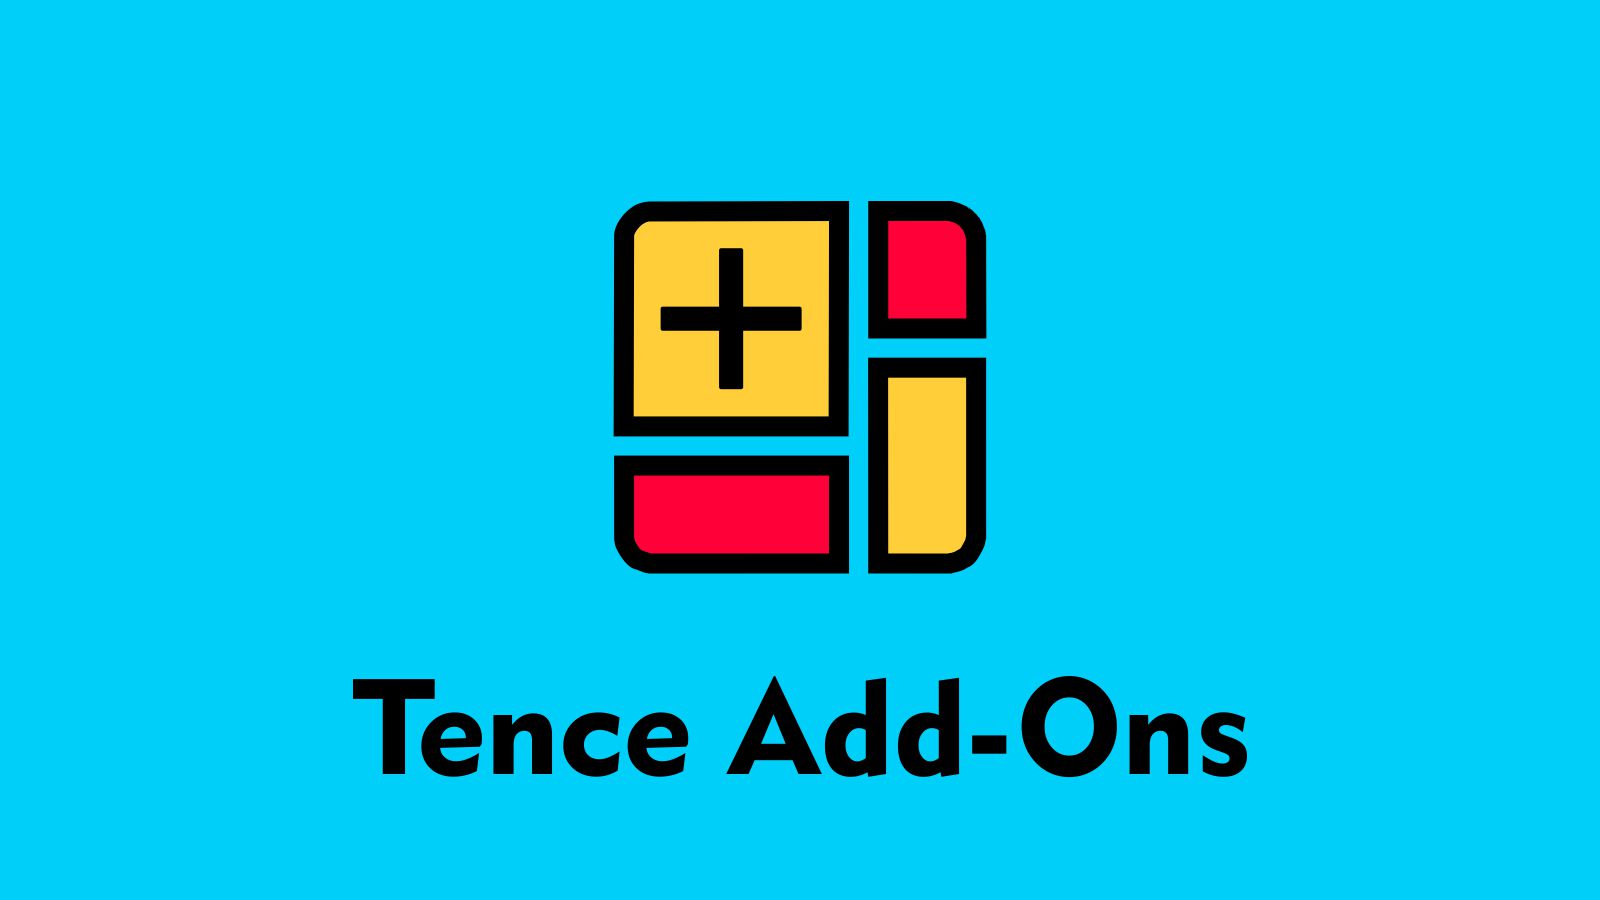 Tence Add-Ons